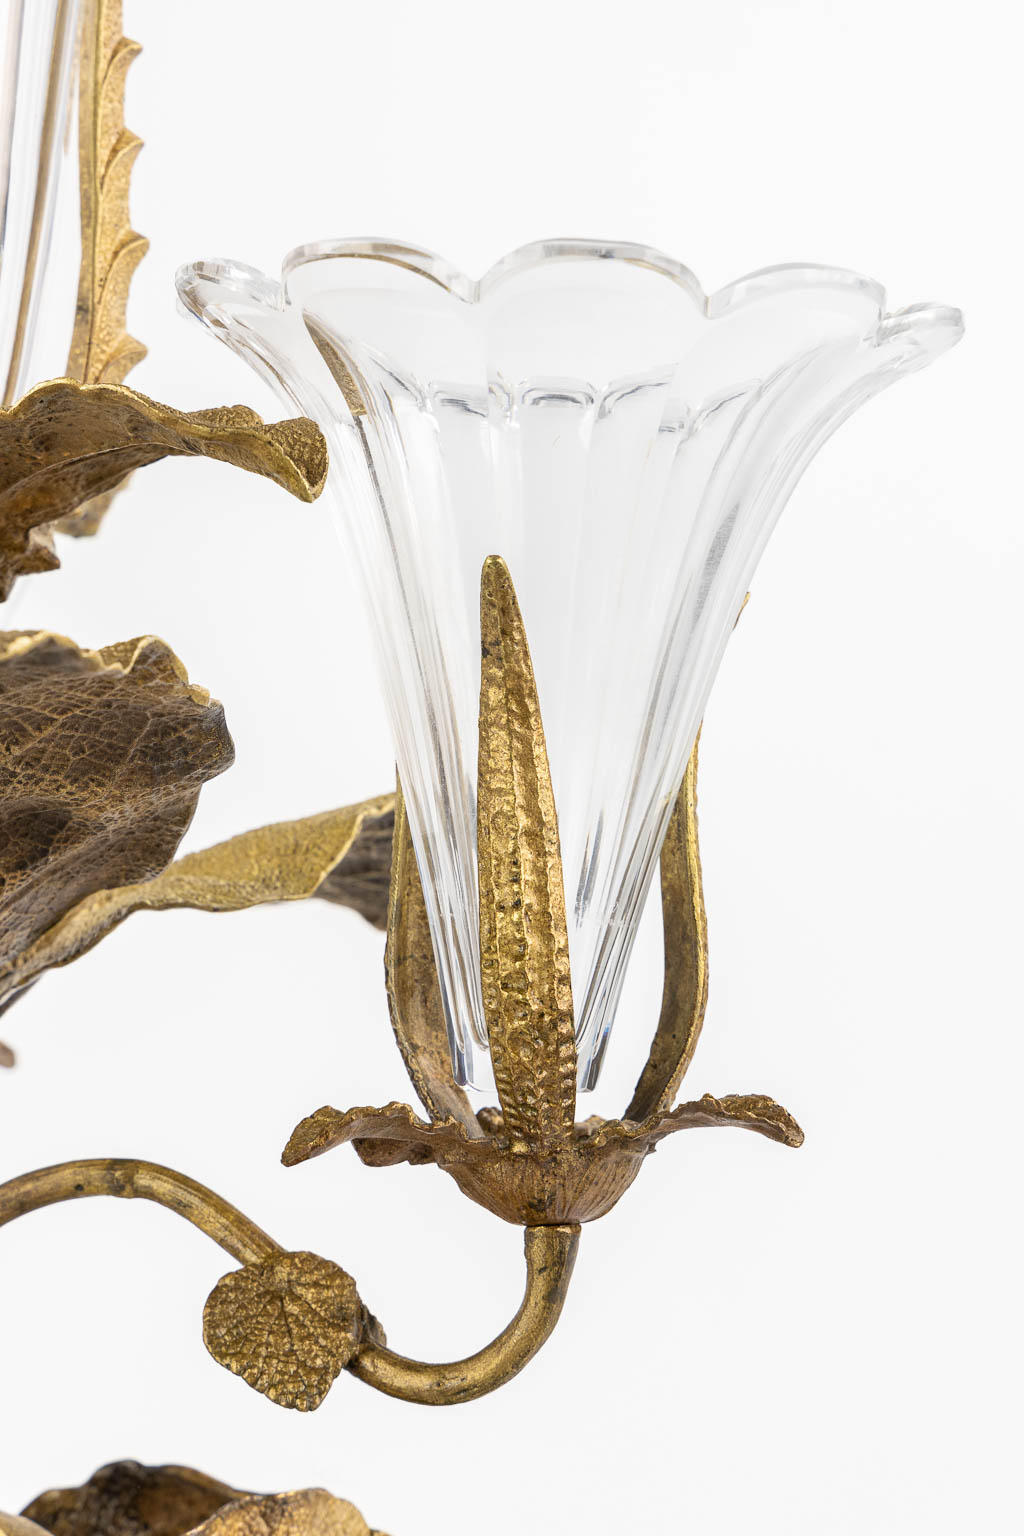 An 'Epergne' or 'Table Centerpiece', bronze and glass trumpet vases. (H:71 x D:44 cm) - Image 8 of 11